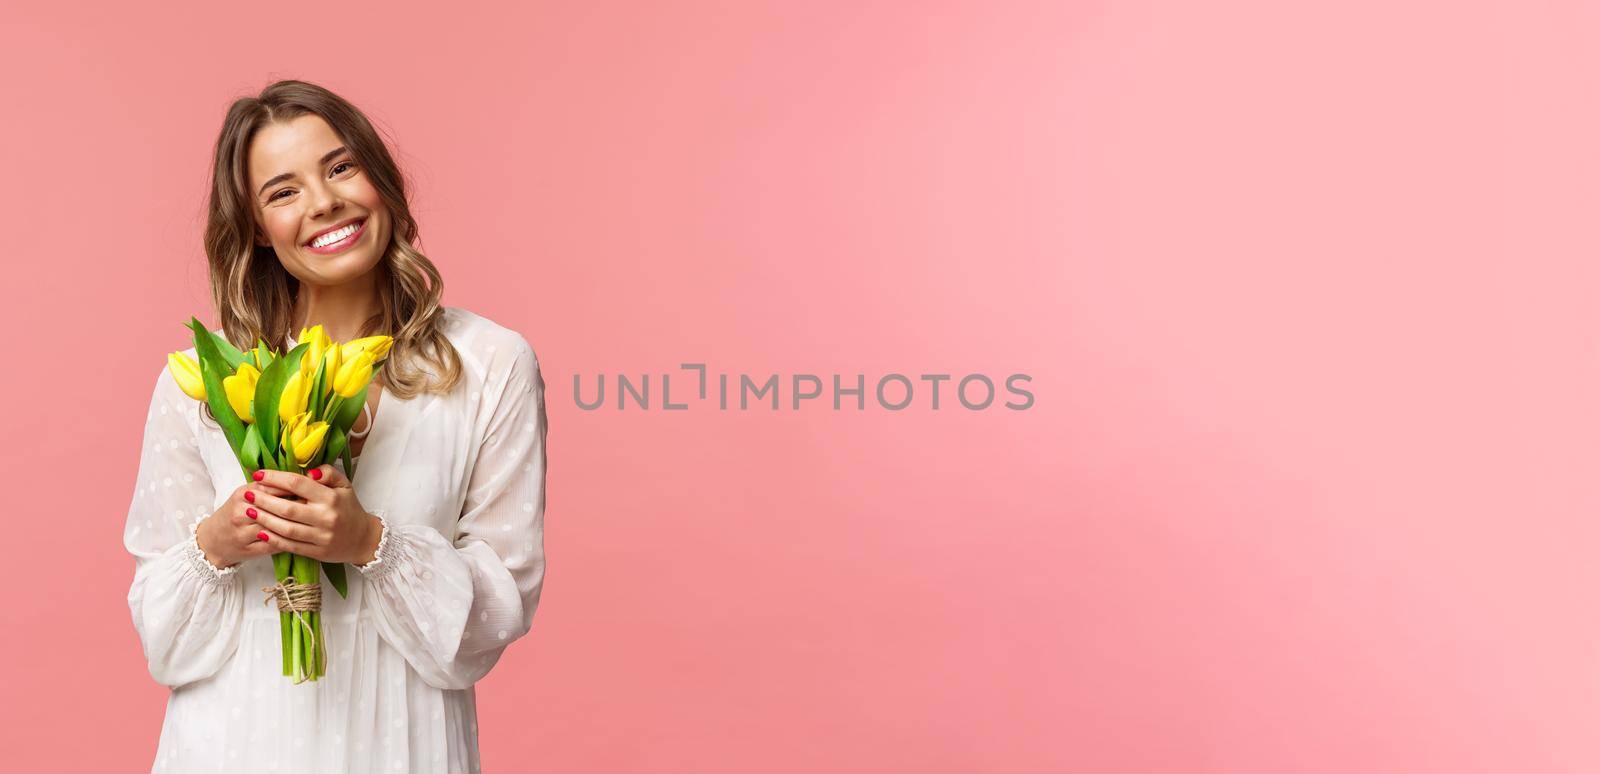 Holidays, beauty and spring concept. Portrait of lovely caucasian blond girl in white dress, smiling upbeat, holding yellow tulips, having perfect romantic date with flowers as gift, pink background.